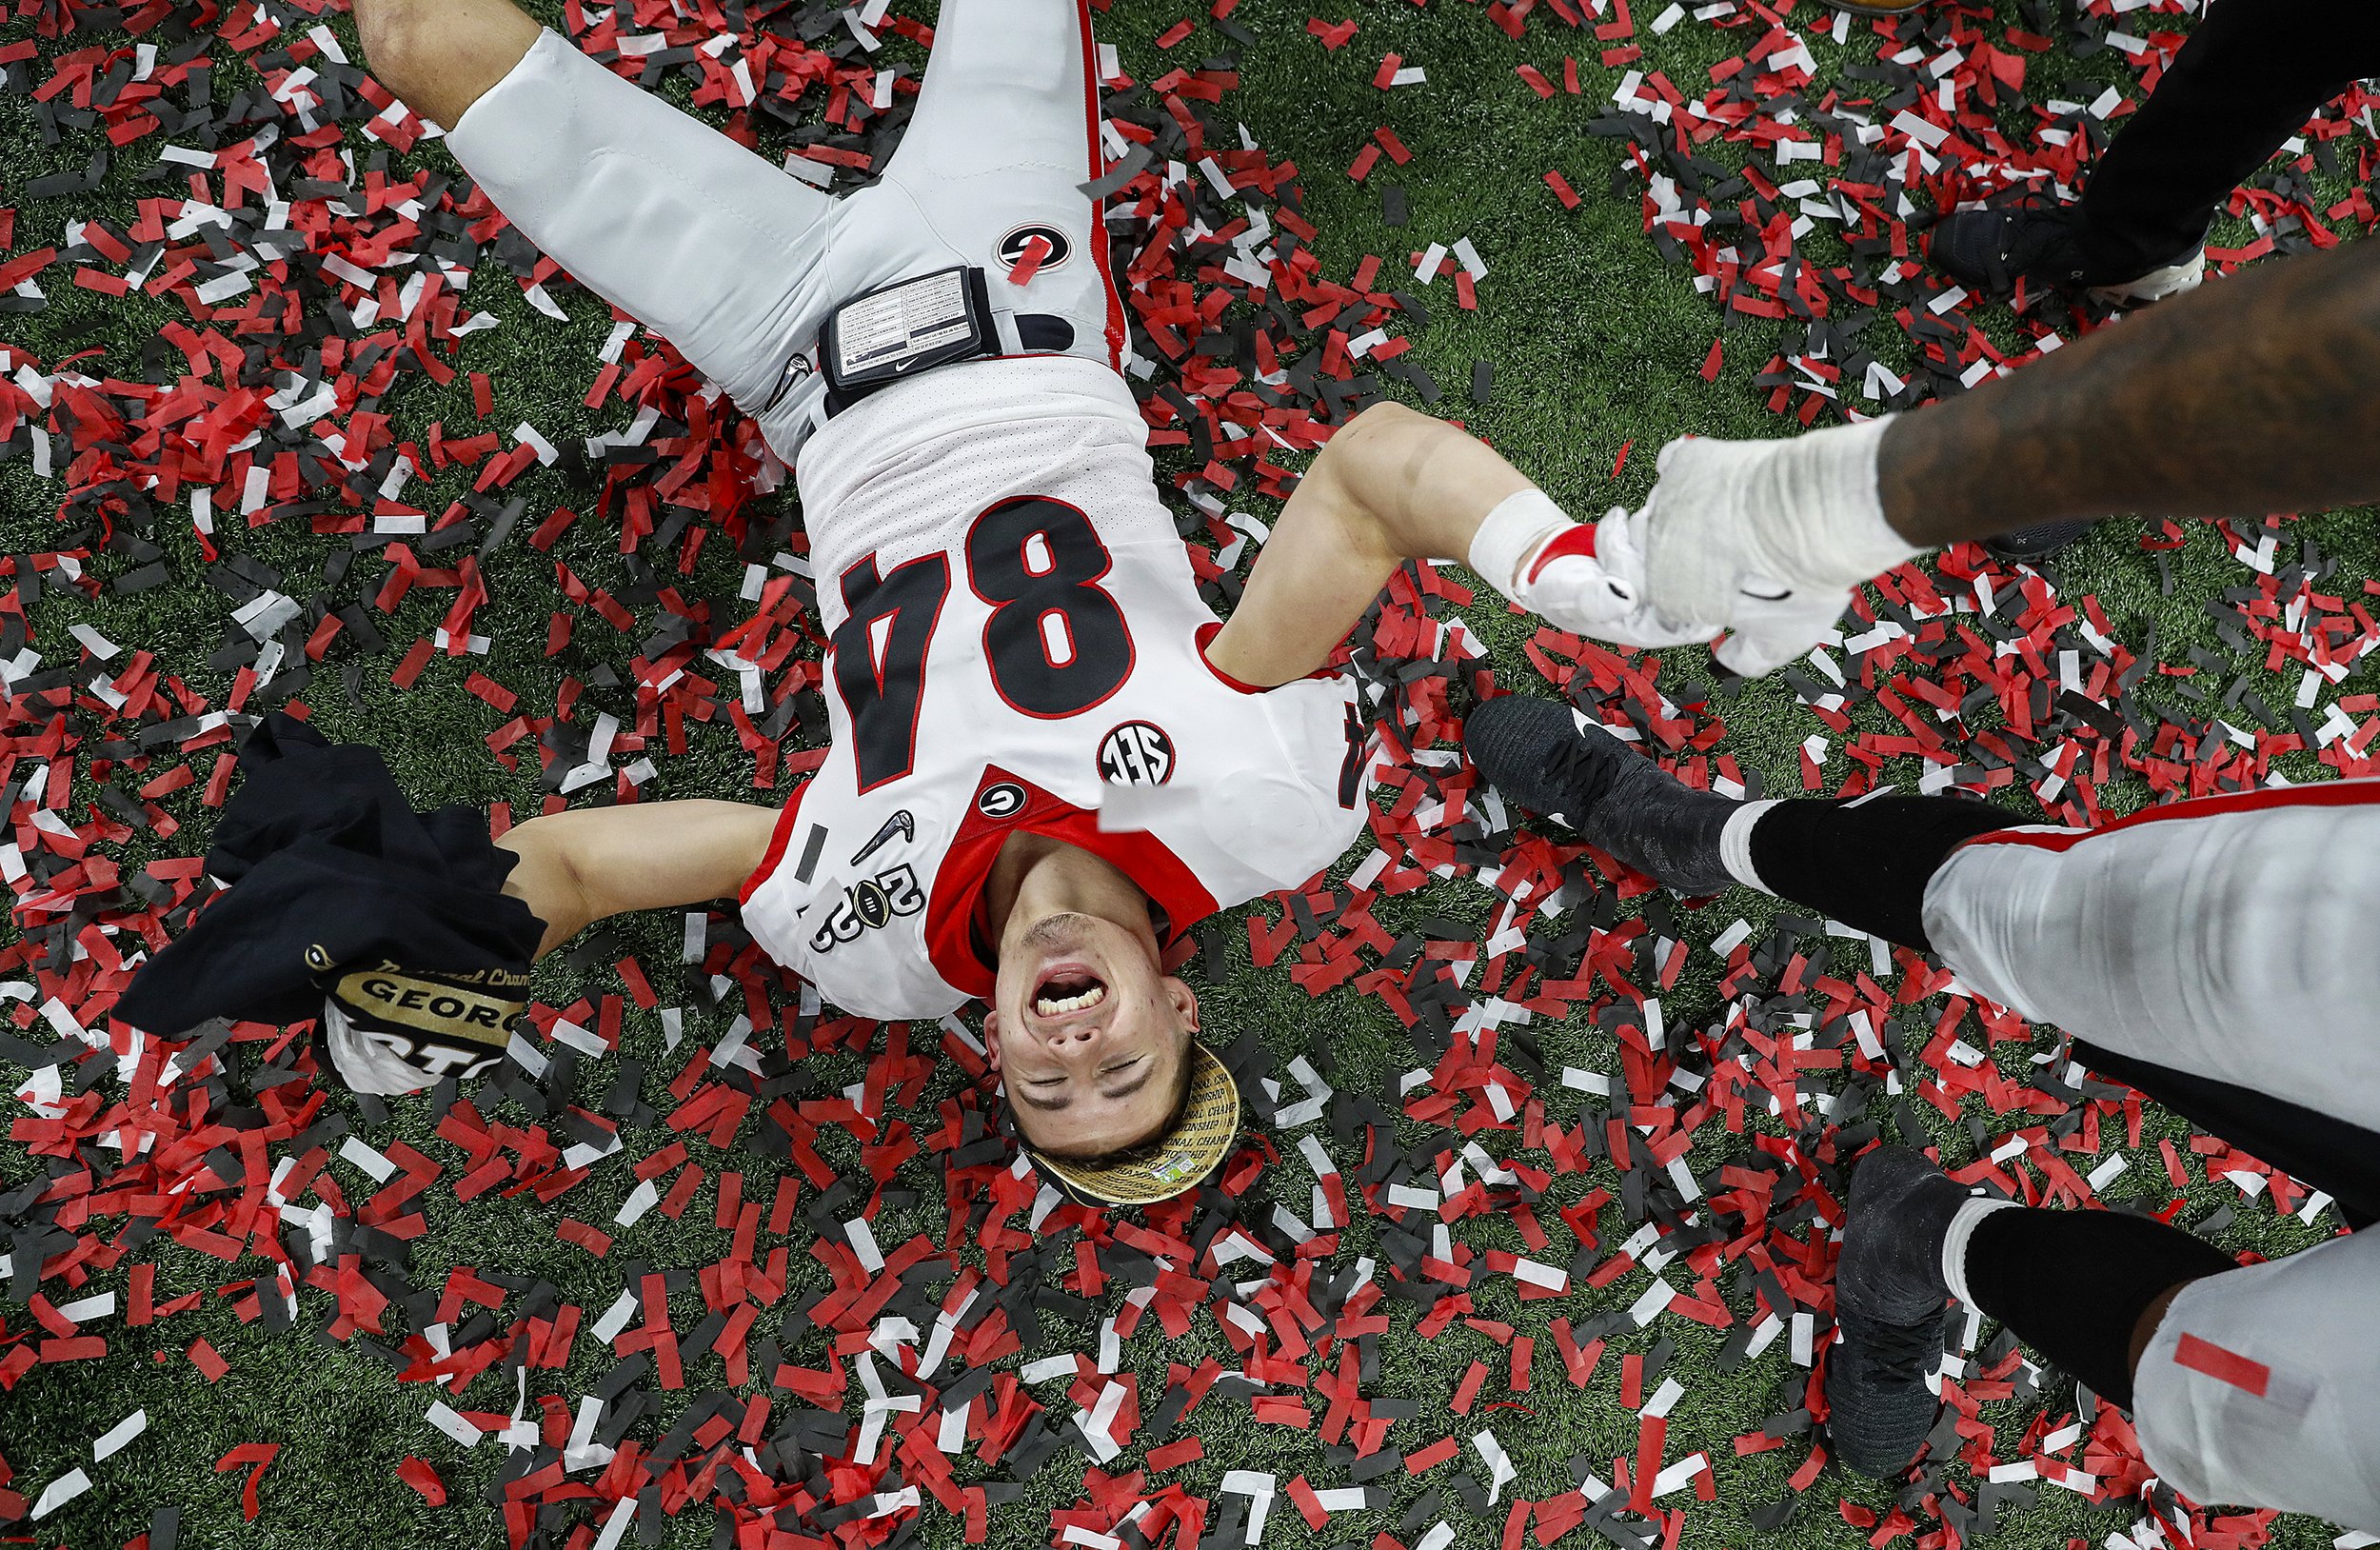  Georgia Bulldogs wide receiver Ladd McConkey (84) lays in confetti after winning the College Football Playoff National Championship on Monday, Jan. 10, 2022, at Lucas Oil Stadium in Indianapolis. The Georgia Bulldogs defeated the Alabama Crimson Tid